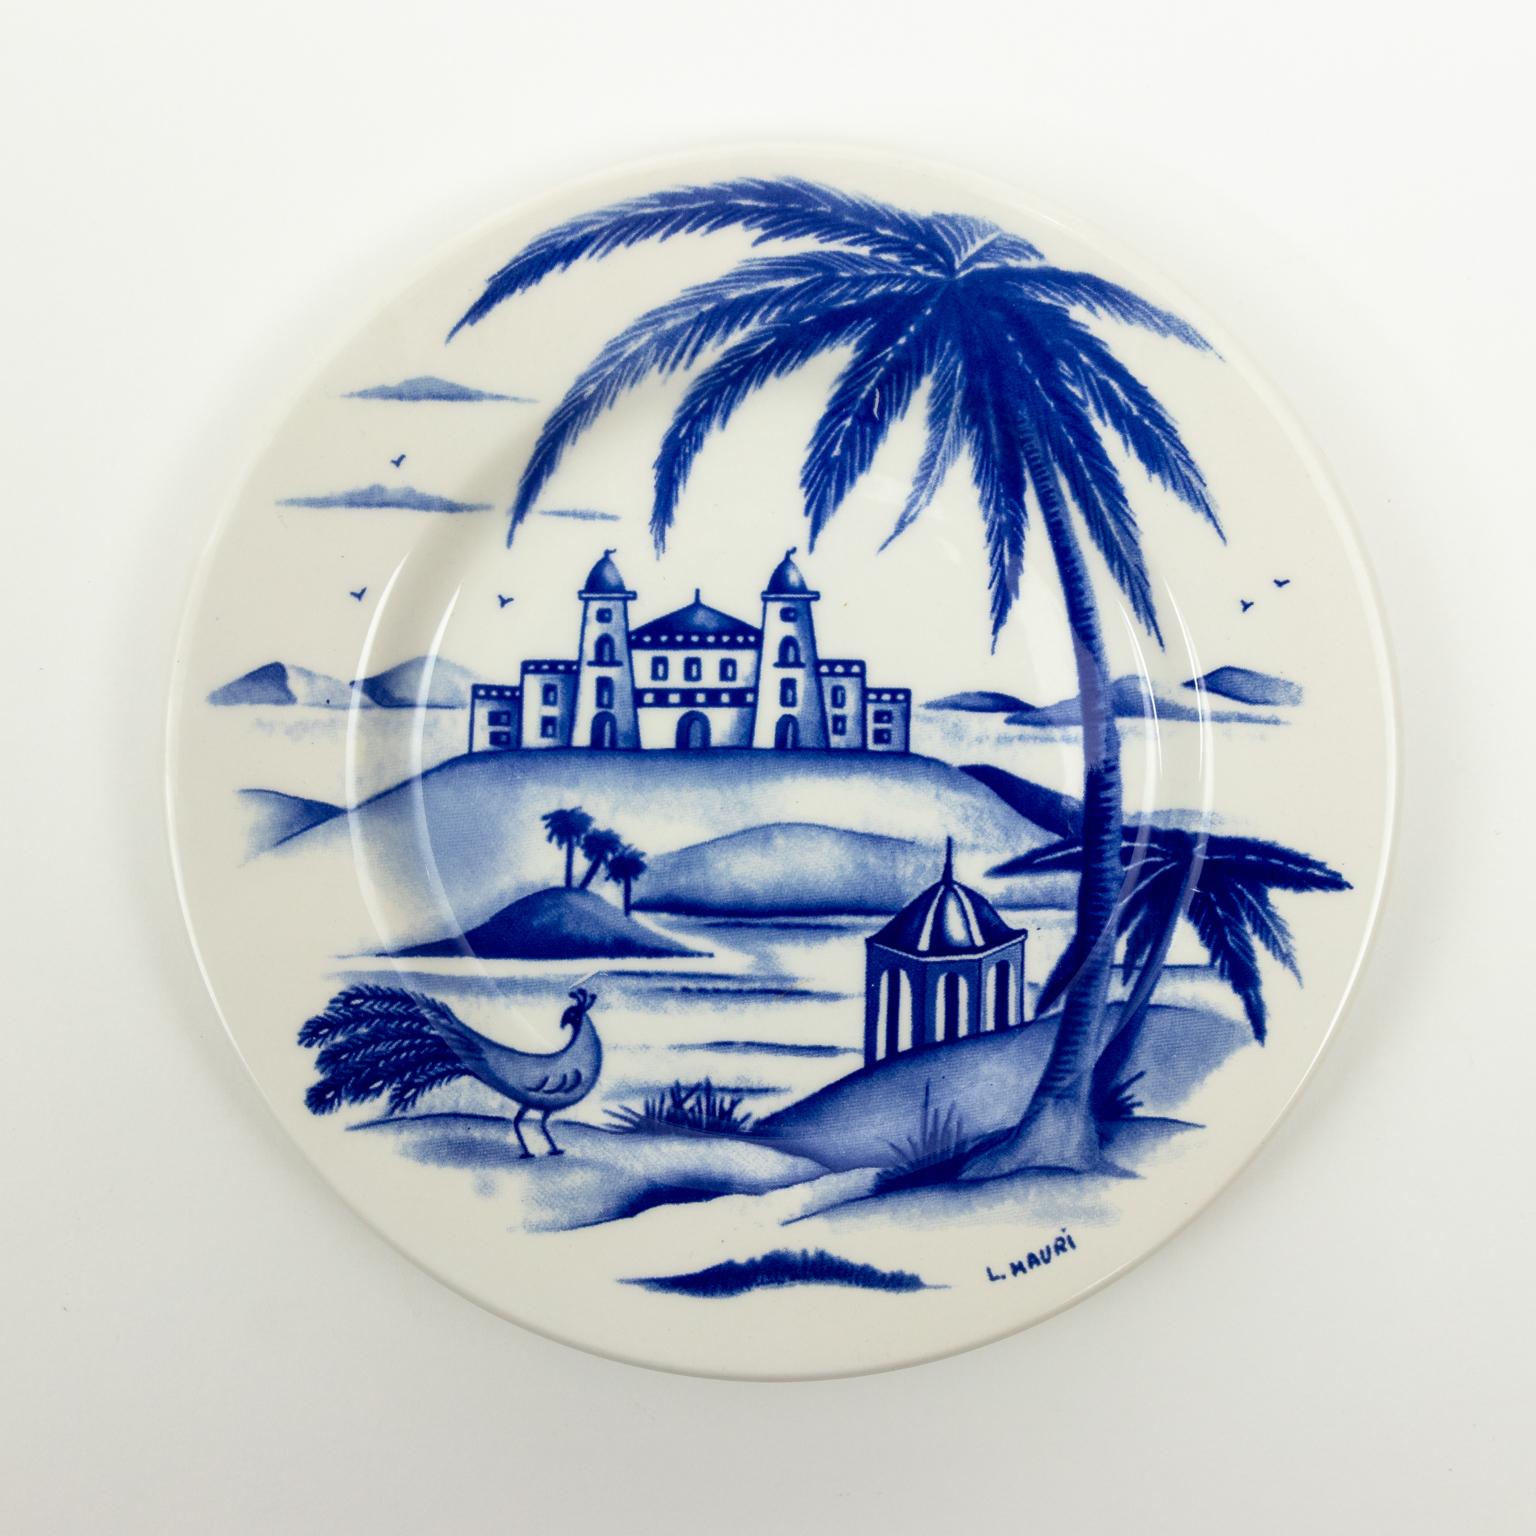 Circa mid-20th century set of four Italian chinoiserie design plates. These hand painted vintage pottery plates with blue and white Chinoiserie landscape designs. Signed on the front 